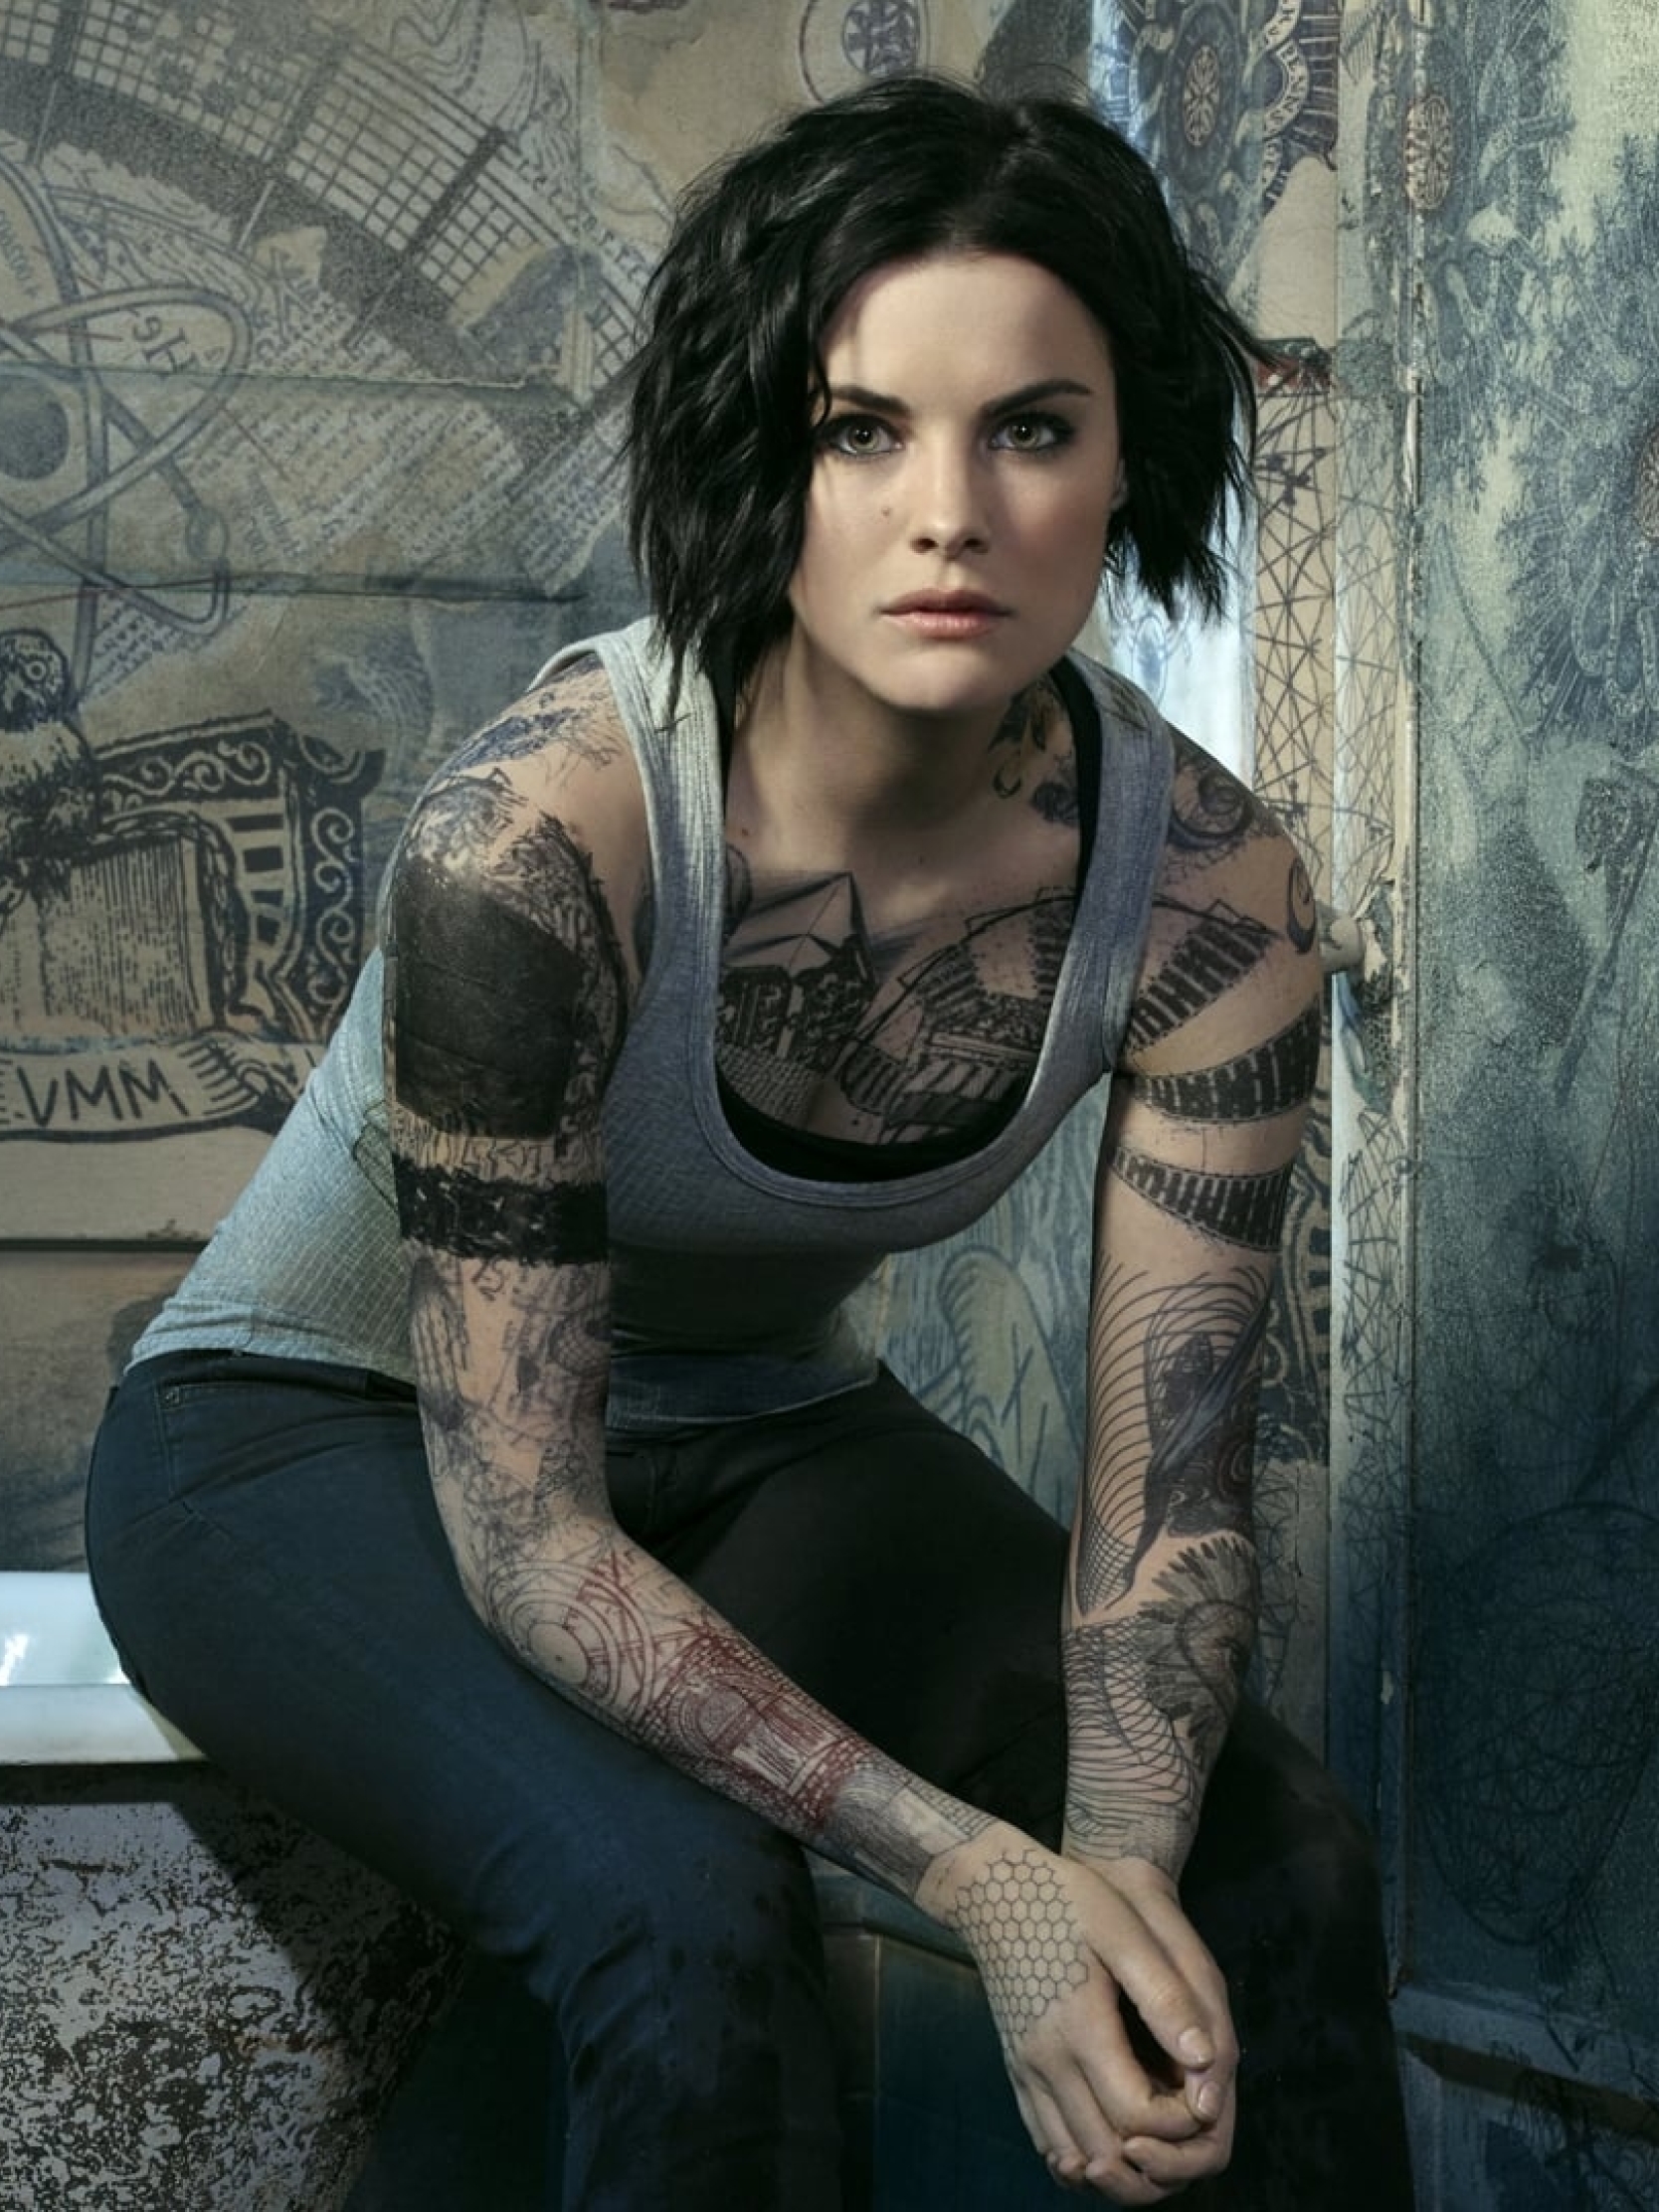 Details 93+ about girl with tattoos tv series super cool -  .vn